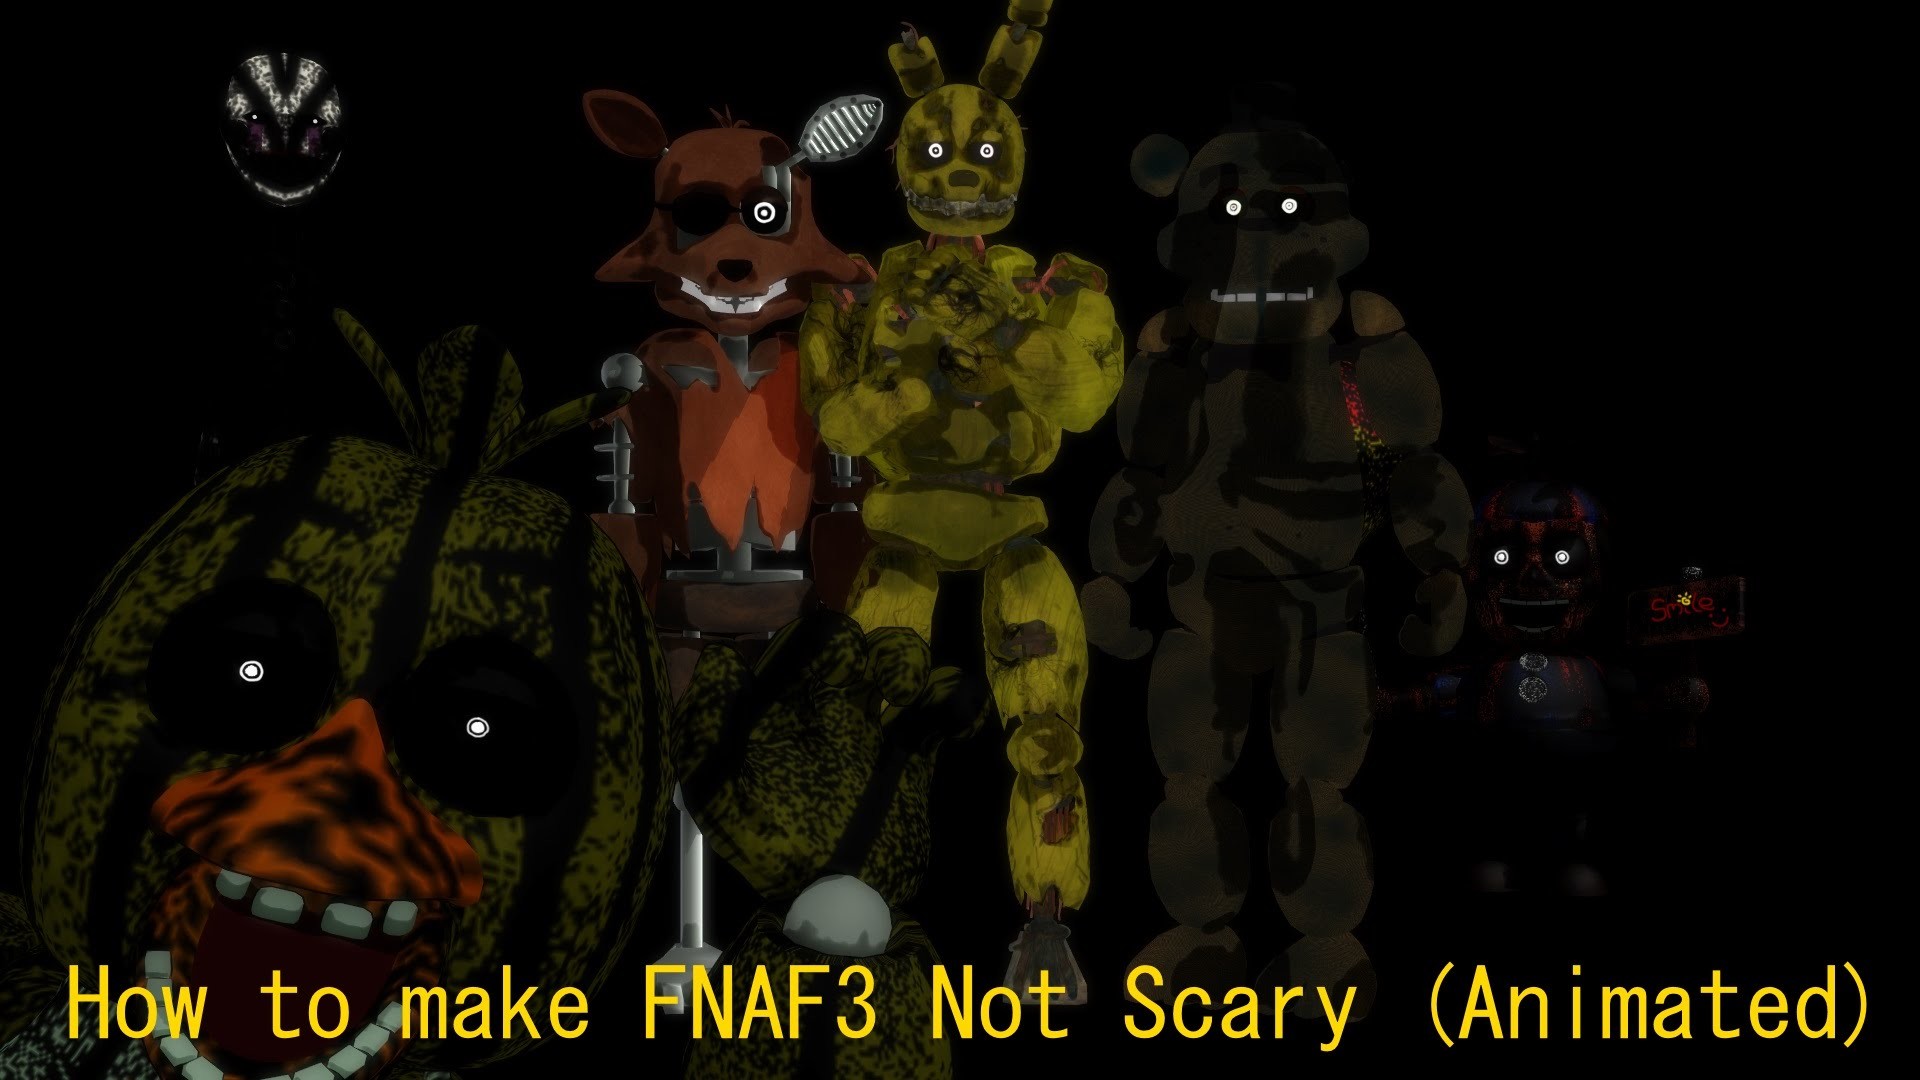 1920x1080 [MMD] How to make Five Nights at Freddy's 3 not scary (Animated) - YouTube